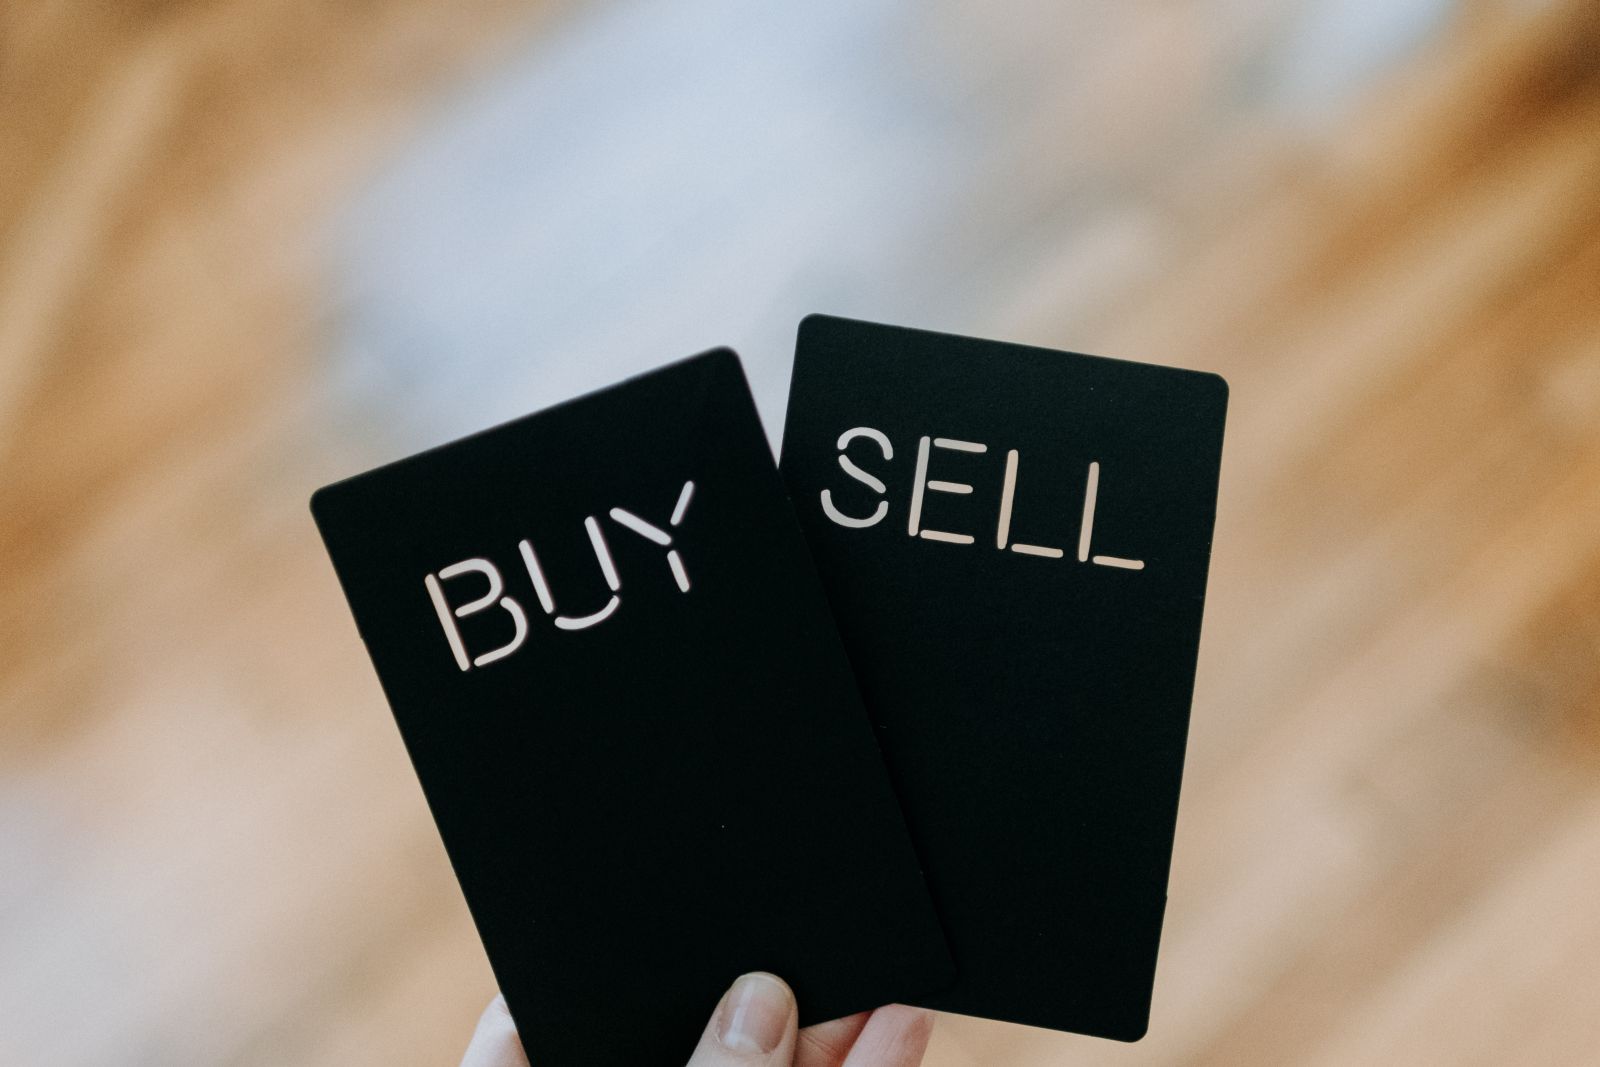 Buy, Sell - Buy Or Sell Signal Cards